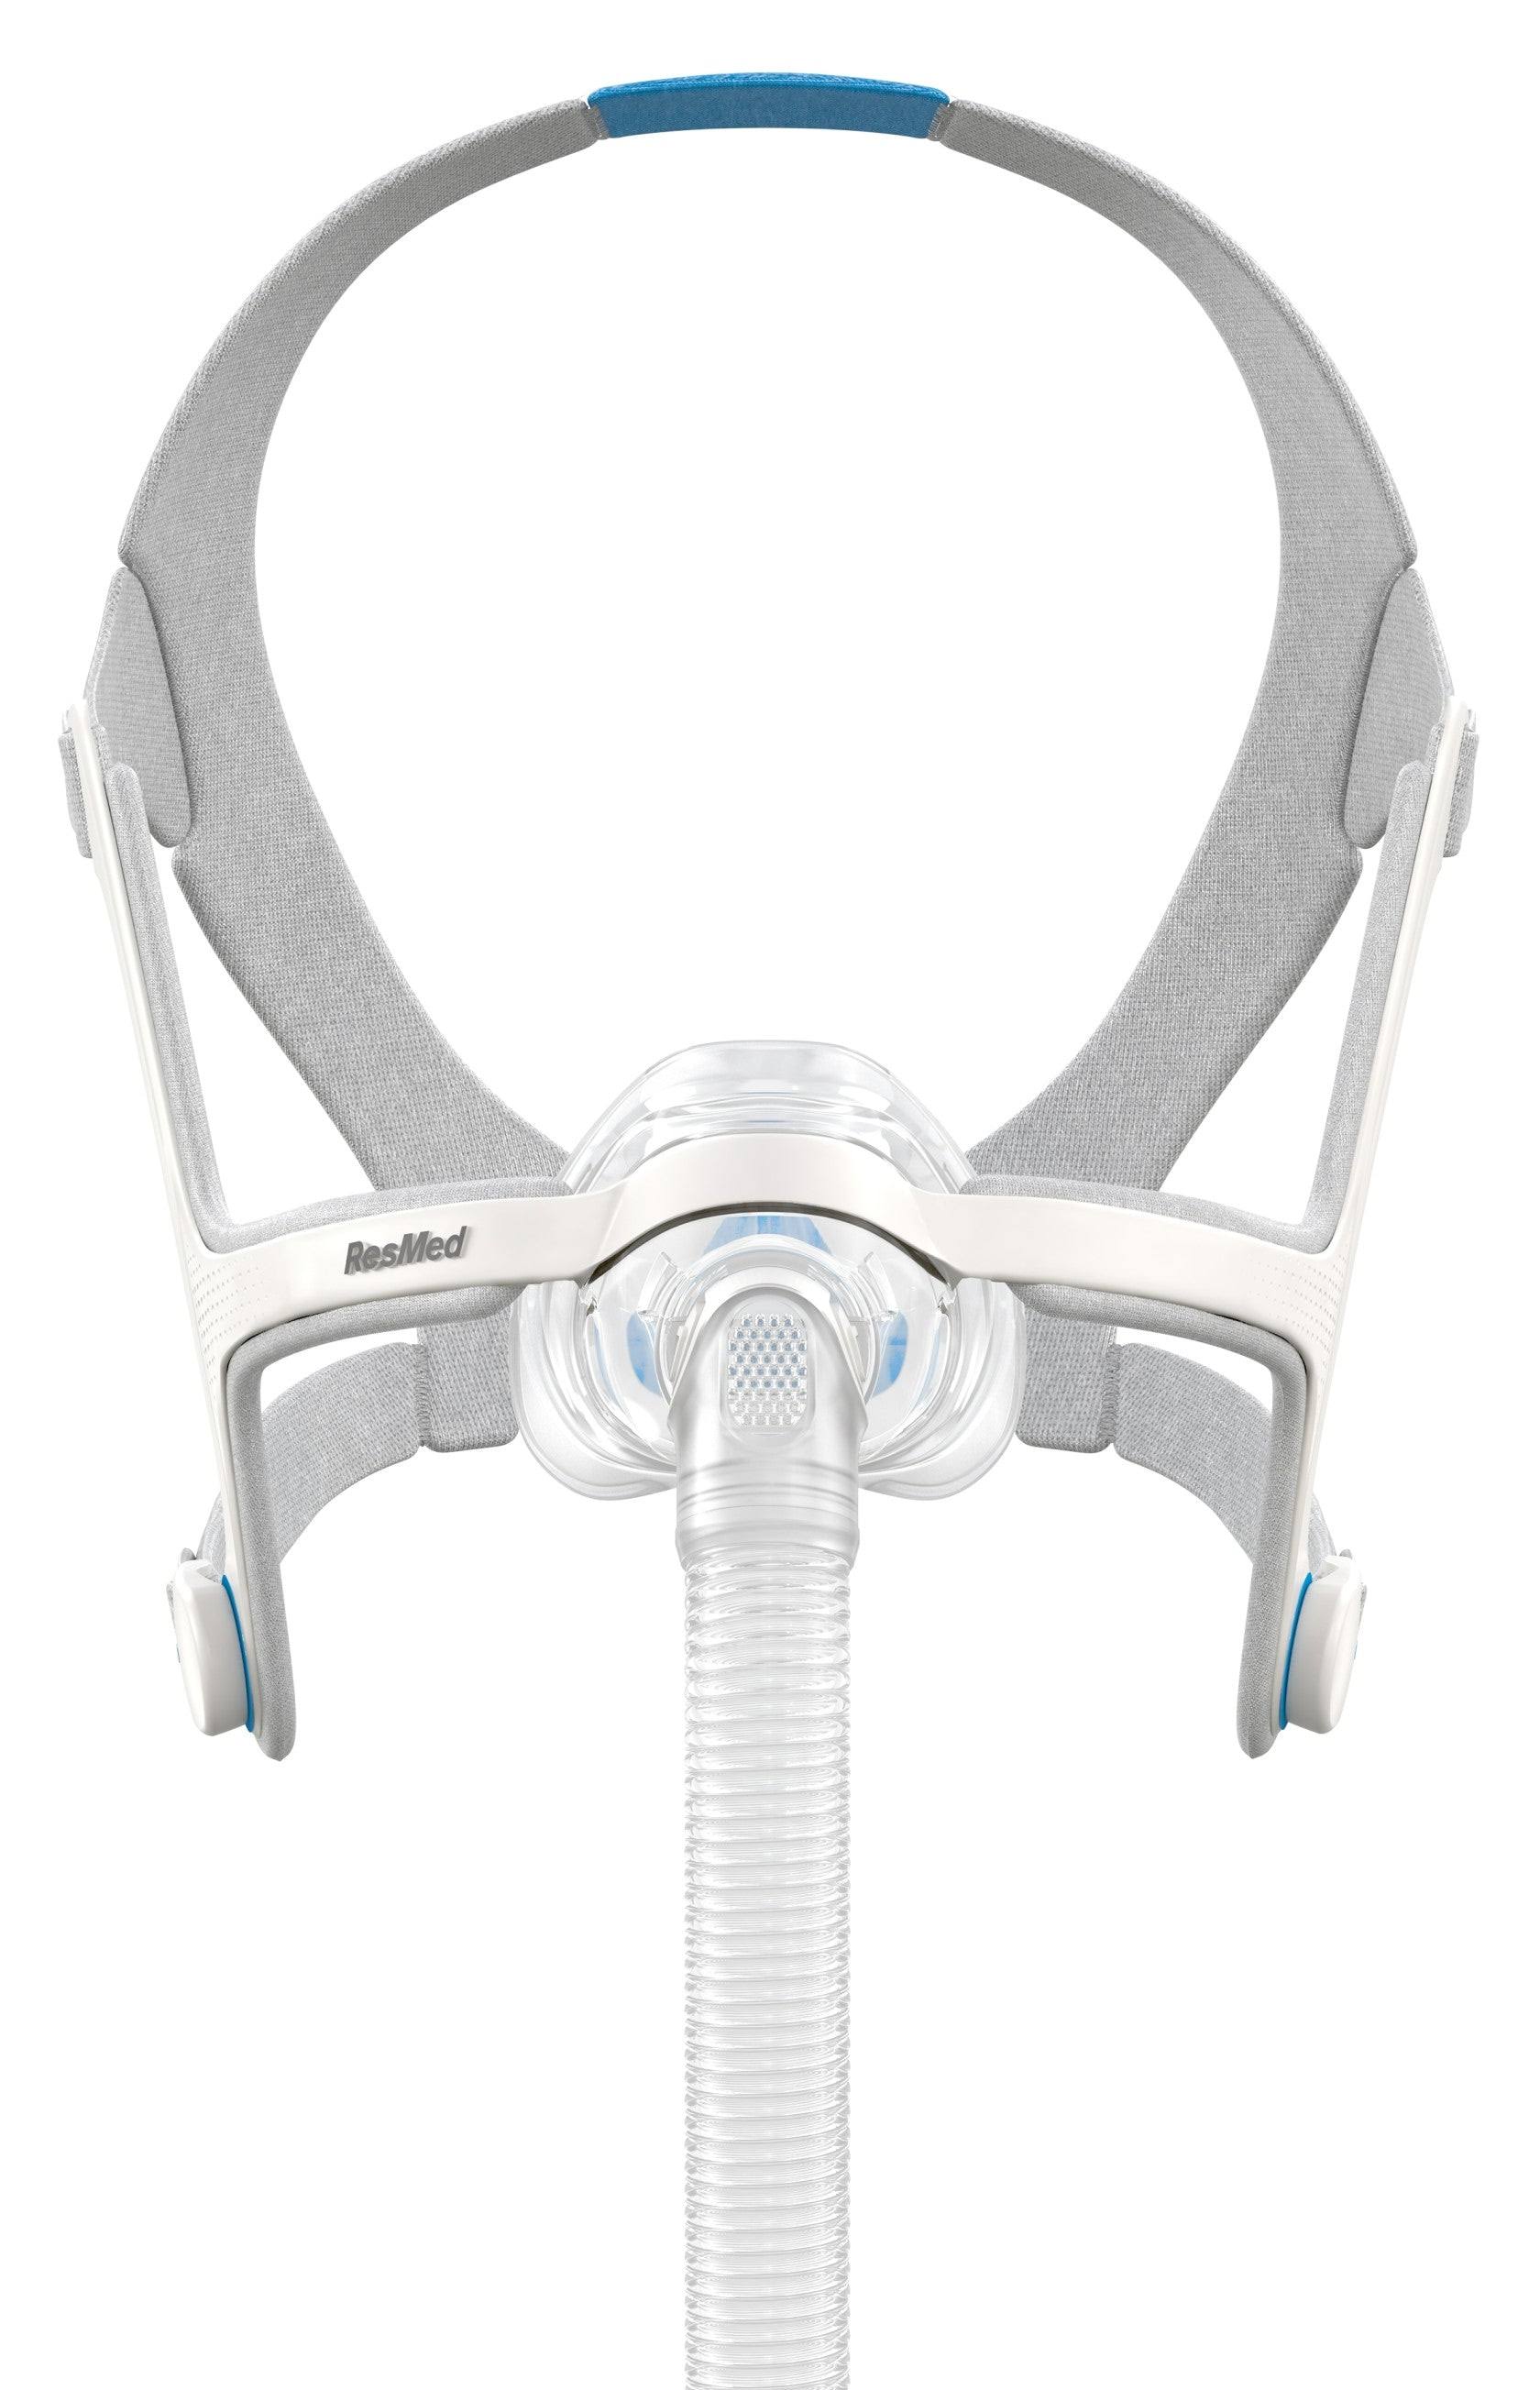 ResMed Airfit N20 Nasal CPAP Mask and Headgear Kit - Small